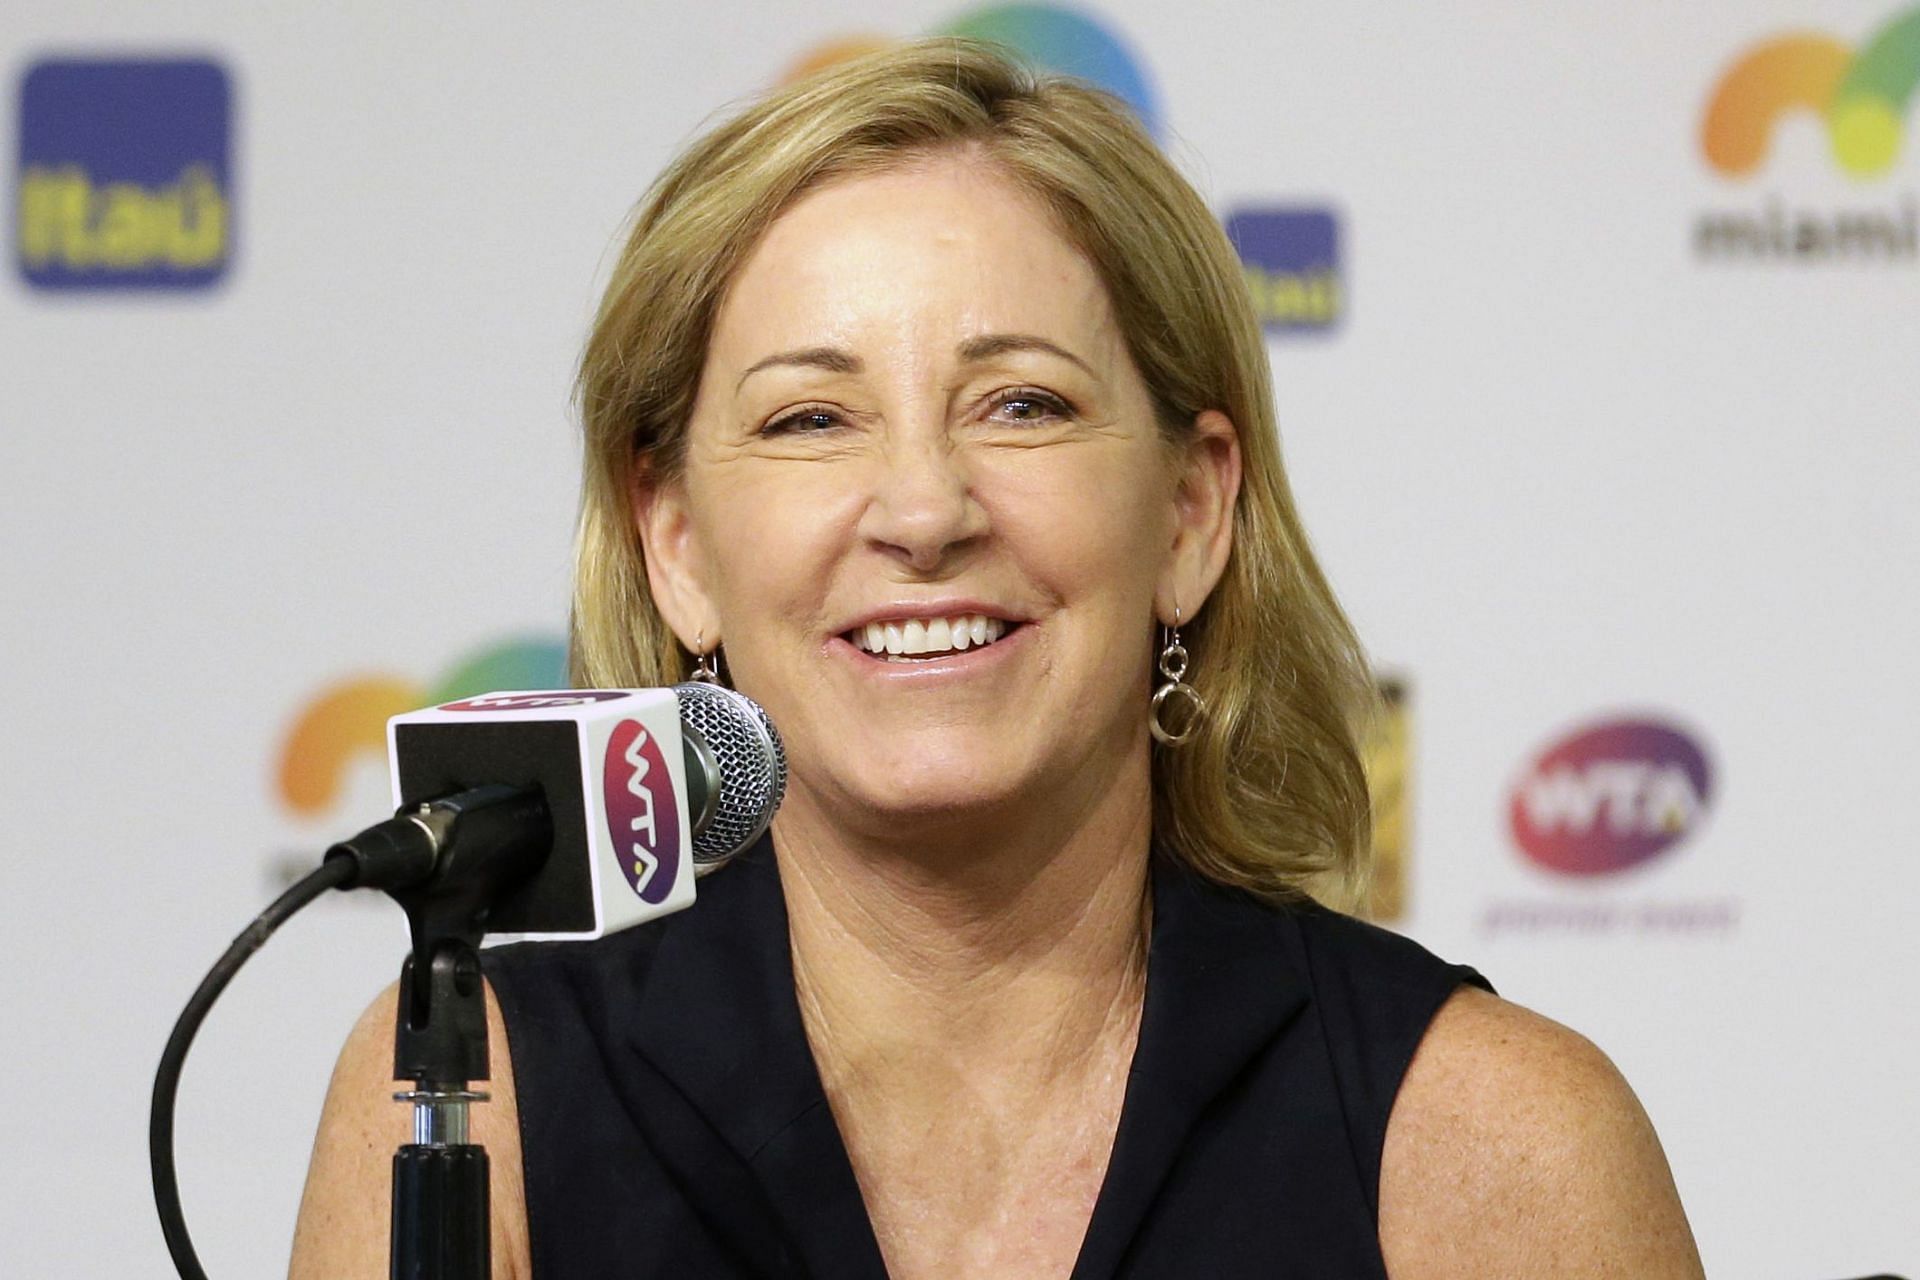 Chris Evert to be honored at US Open 2023 with 'Serving Up Dreams' award